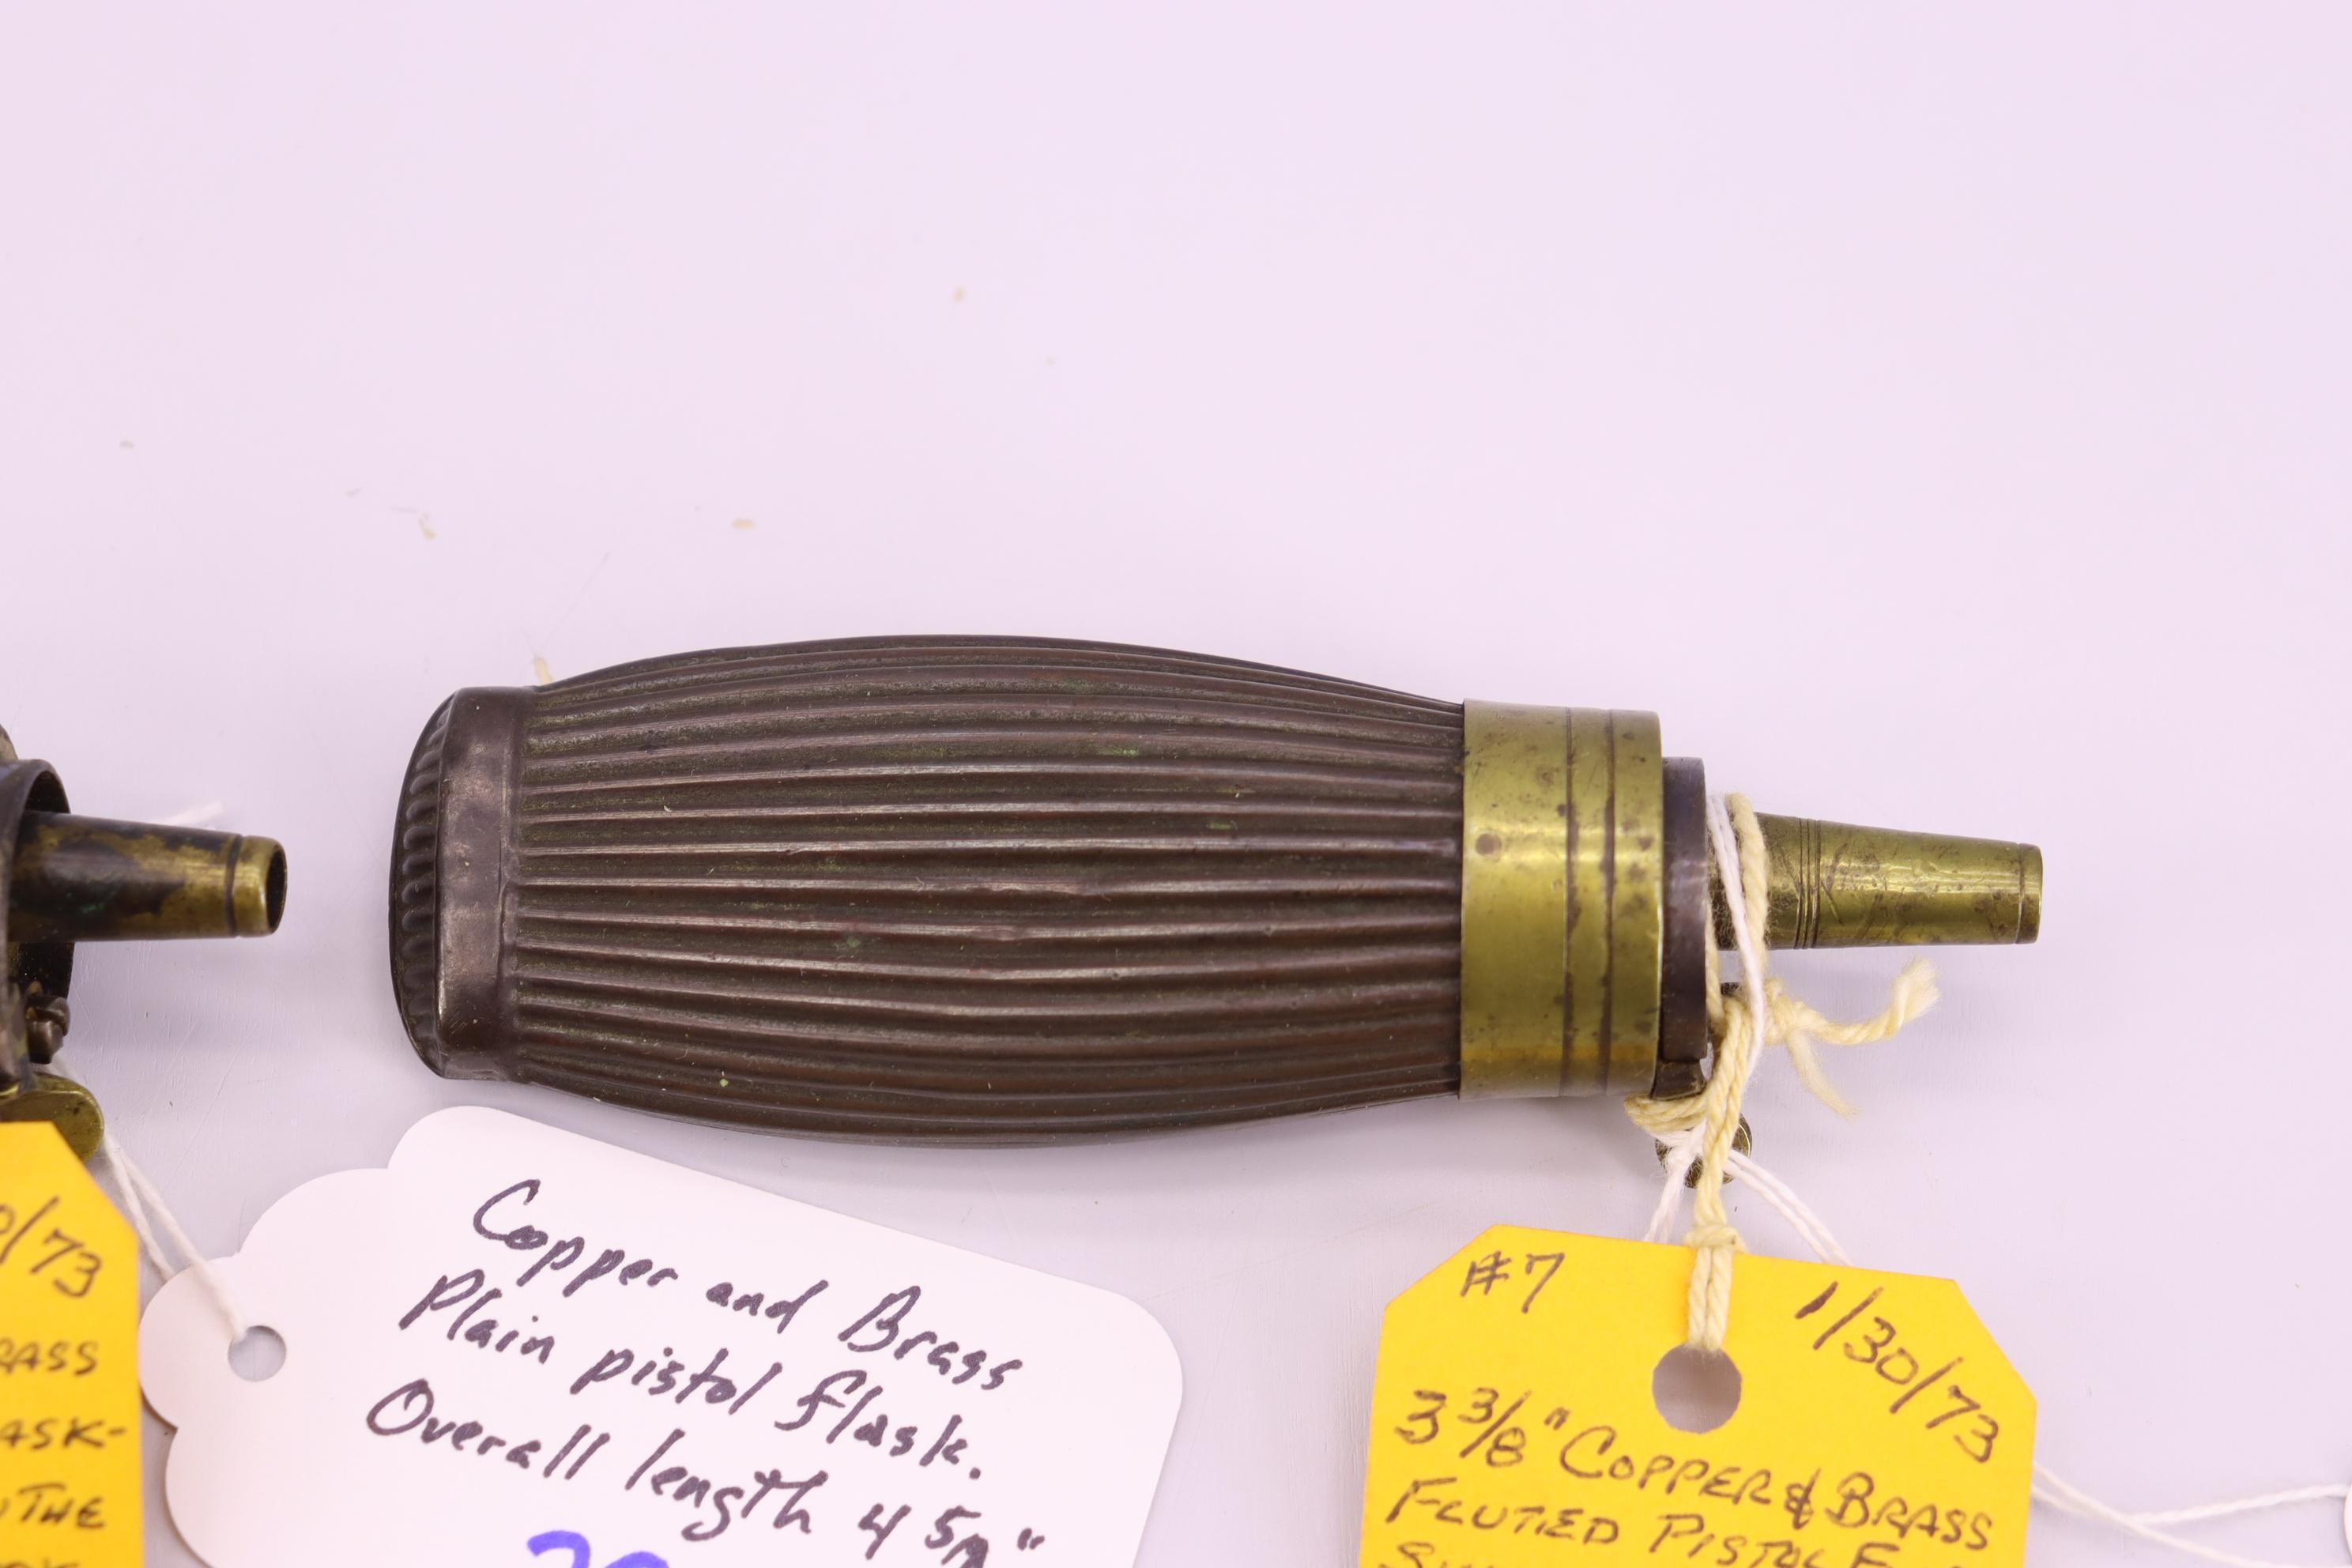 Pair of Powder Flasks – 1st Copper and Brass Fluted Pistol Flask, Overall Length is 4 ½” – 2nd Coppe